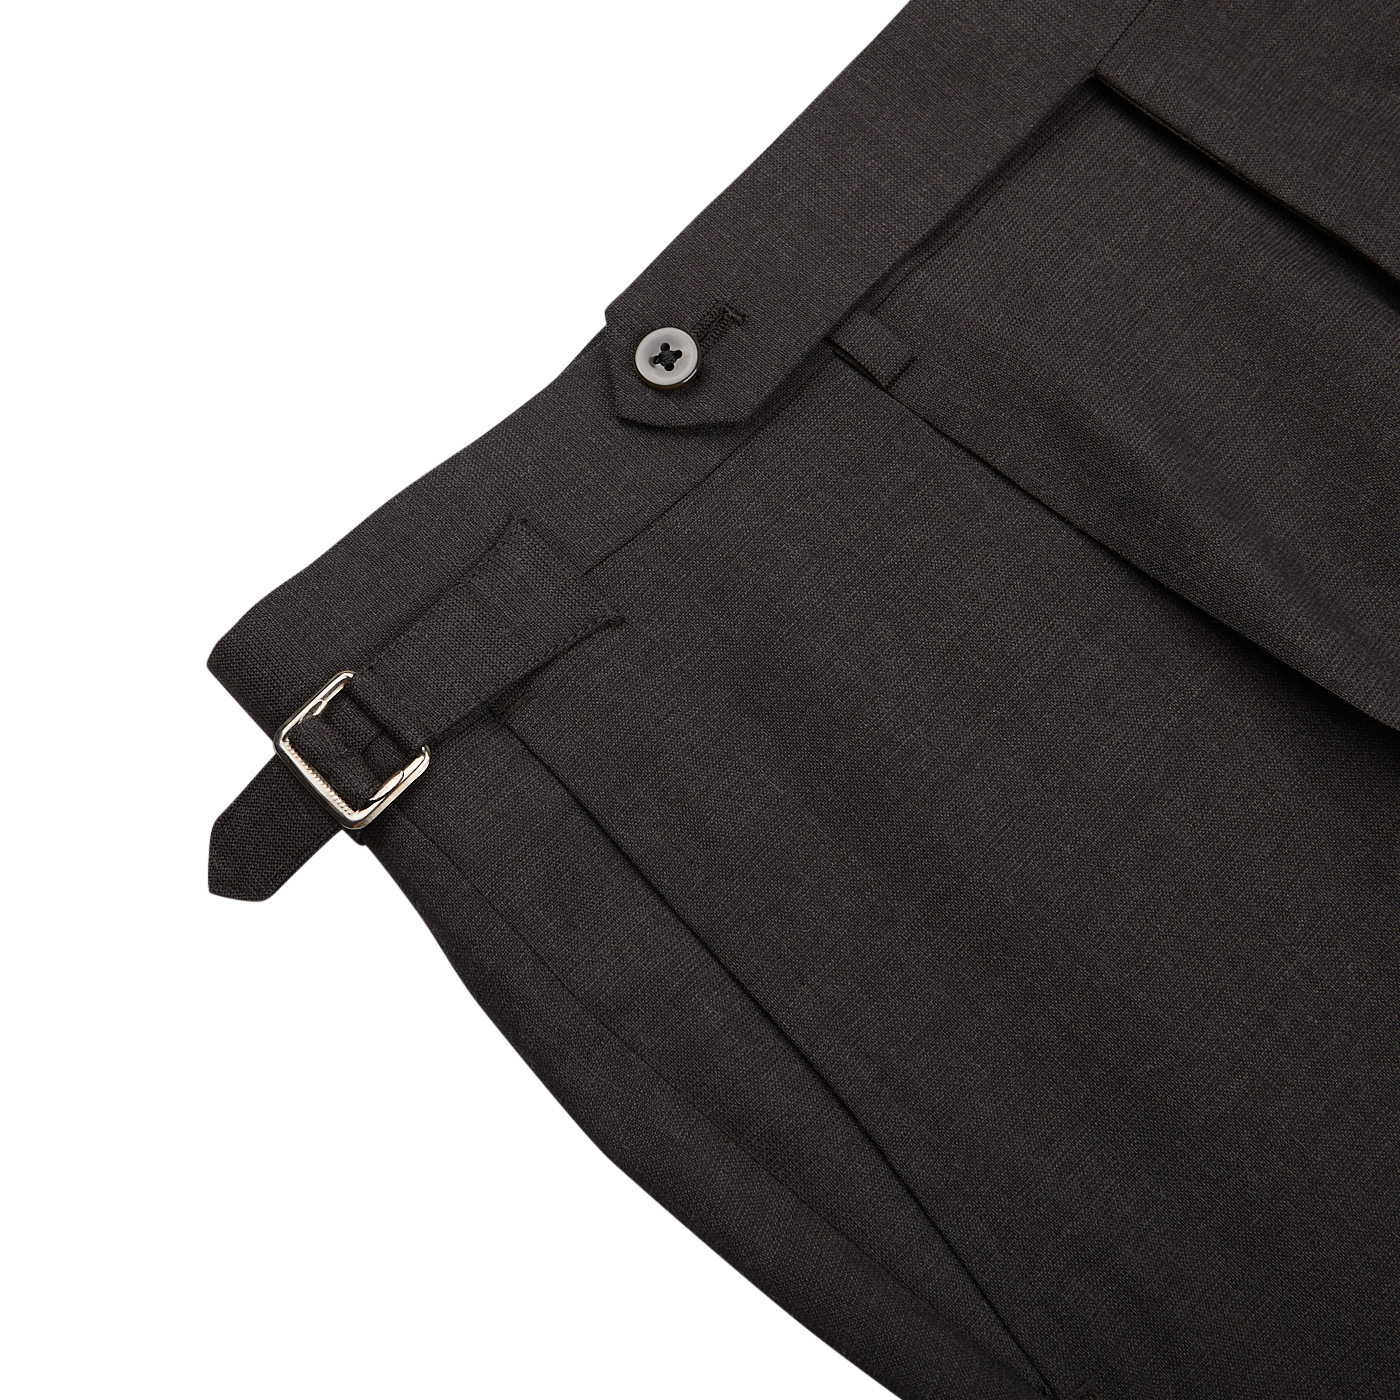 Close-up of a Dark Brown High Twist Wool Suit trouser by Ring Jacket with a side adjuster and button detail on a light background.